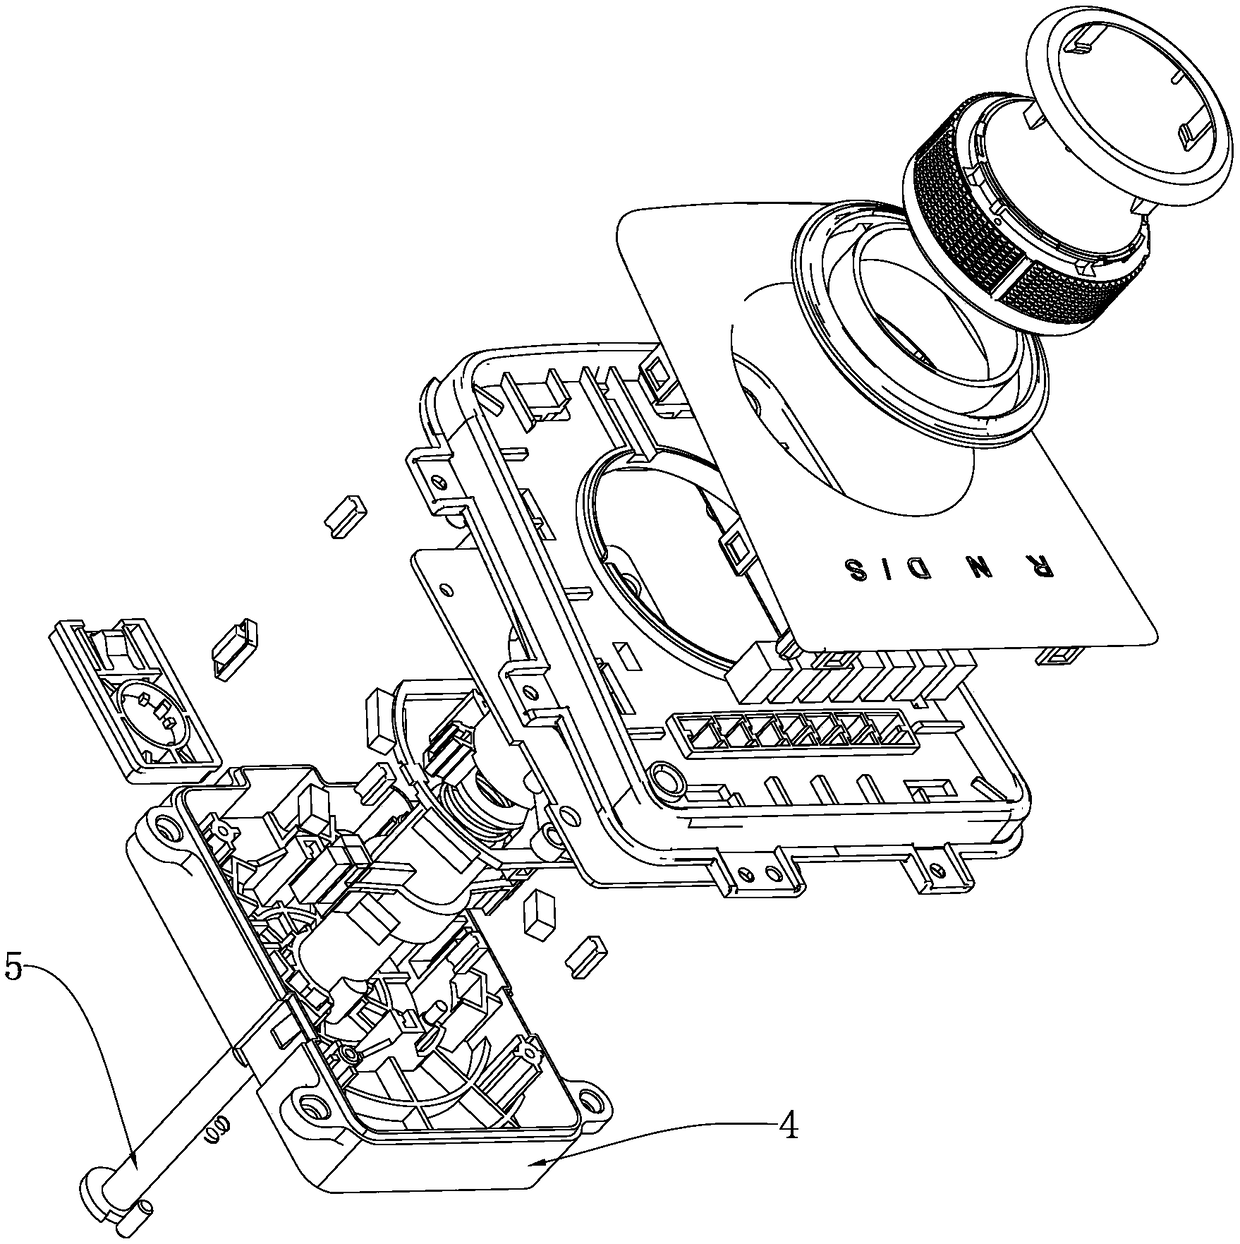 Rotary electronic gear shifting device